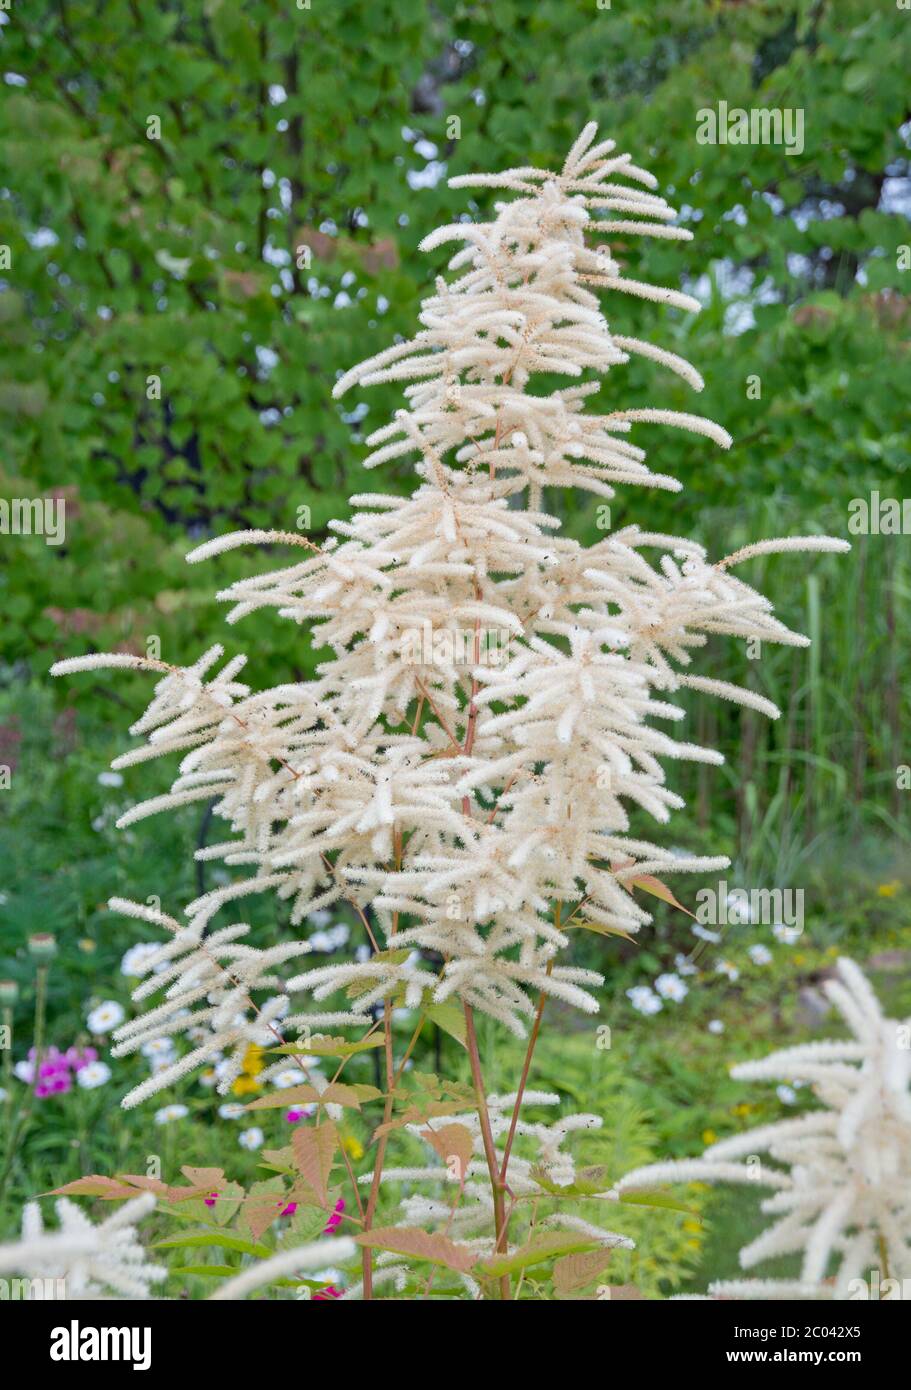 Feathery white Astilbe flowers. Stock Photo